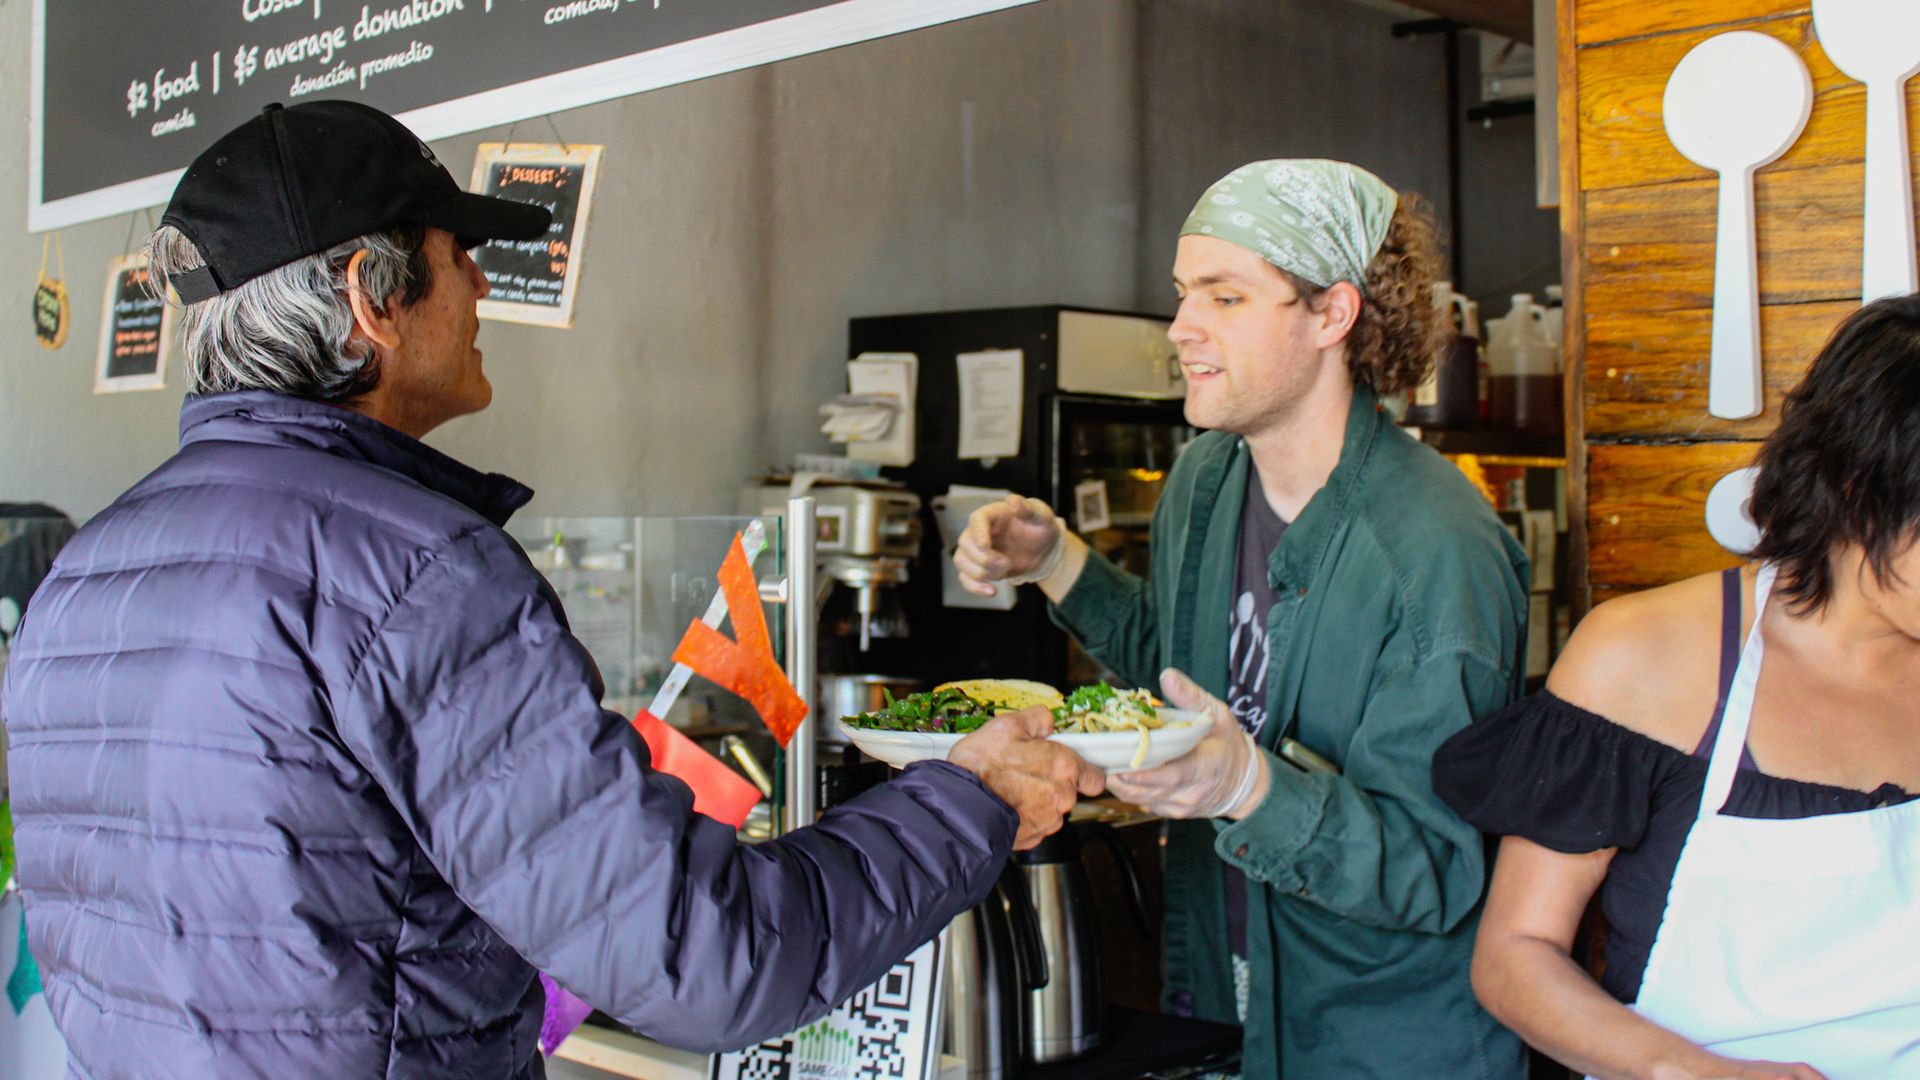 A SAME Cafe staff member hands a plate of food to a guest over the counter.